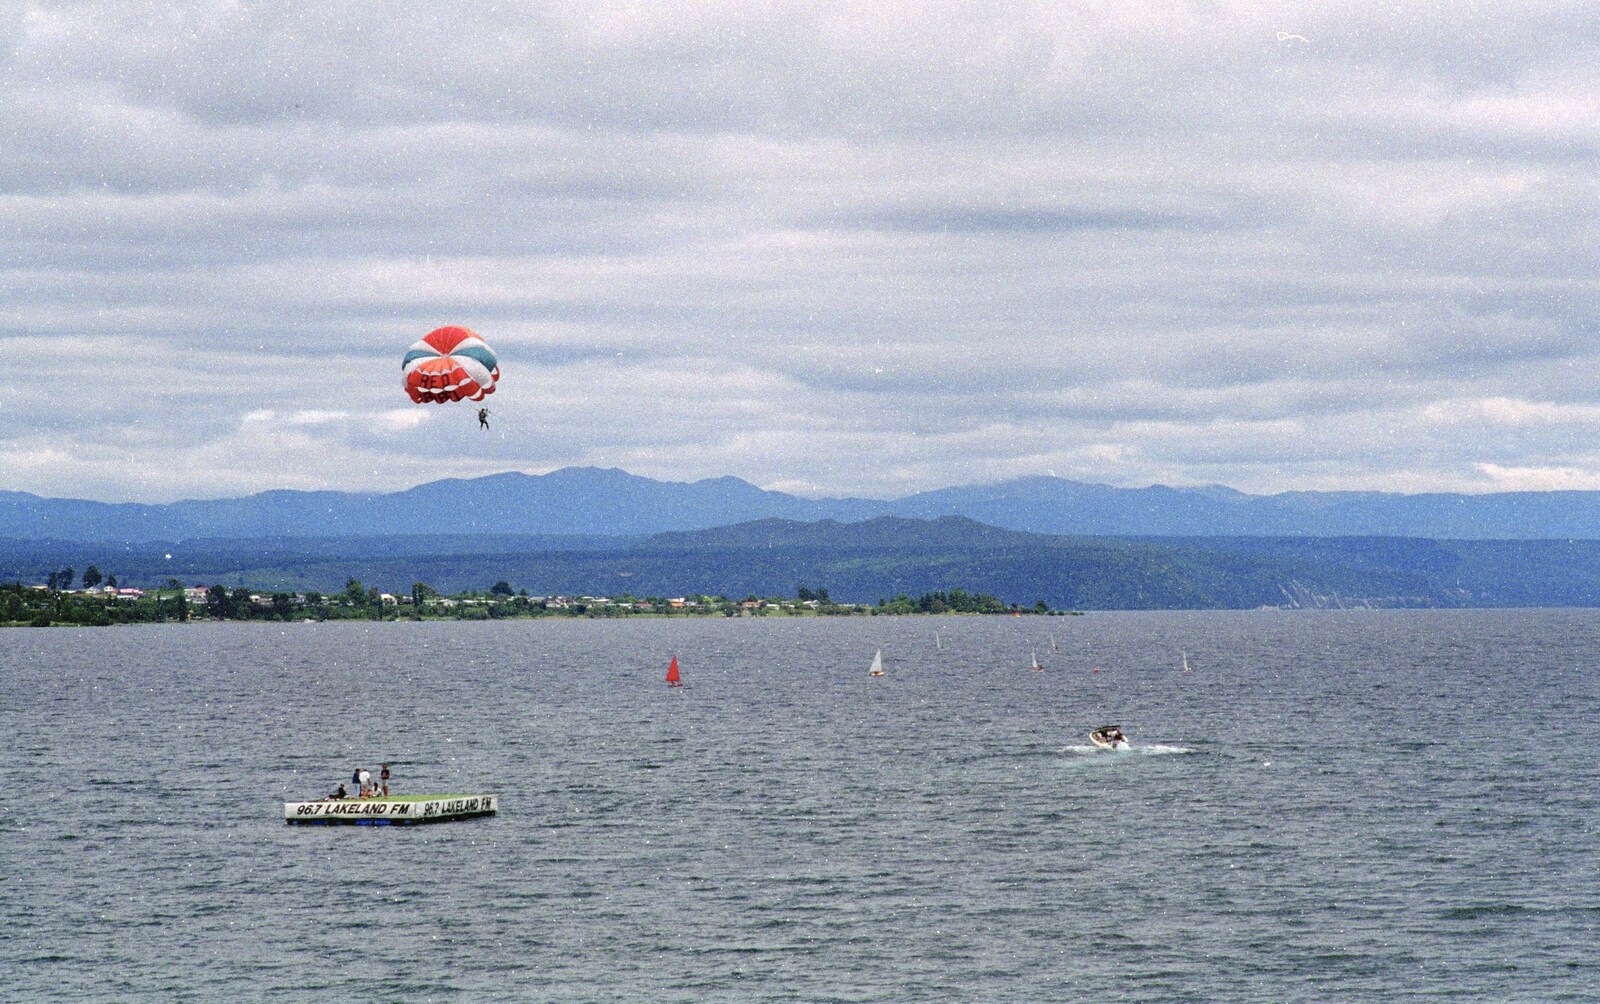 A Parascender on Lake Taupo from A Road-trip Through Rotorua to Palmerston, North Island, New Zealand - 27th November 1992